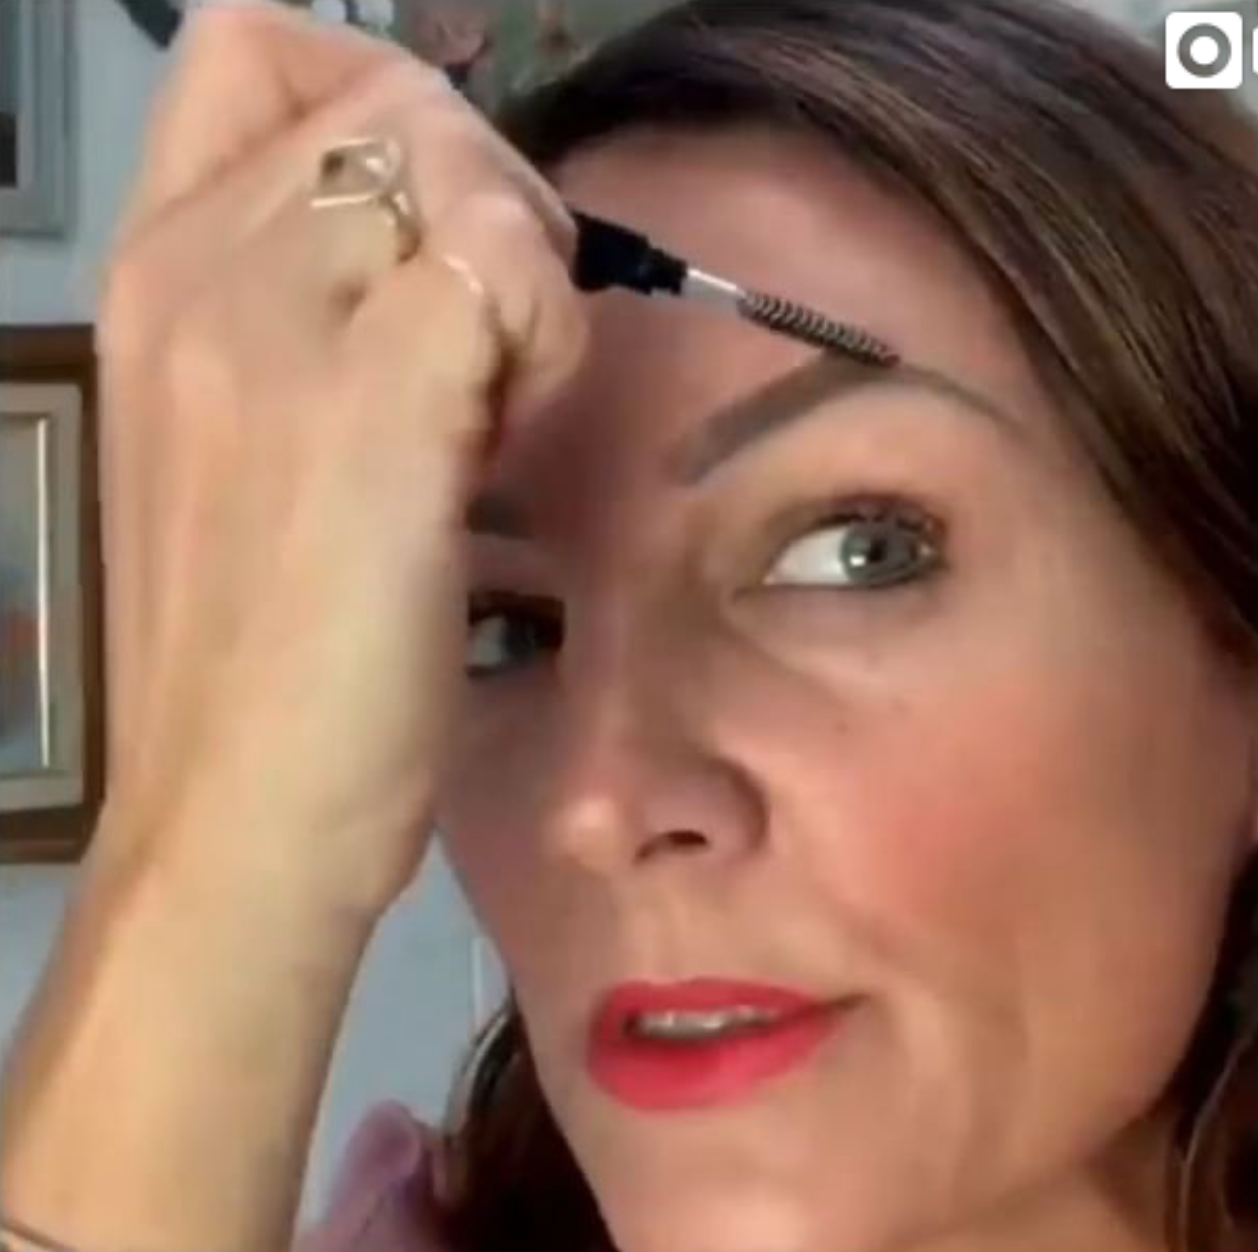 Brow Tutorial using the Donna May London Brow Kit